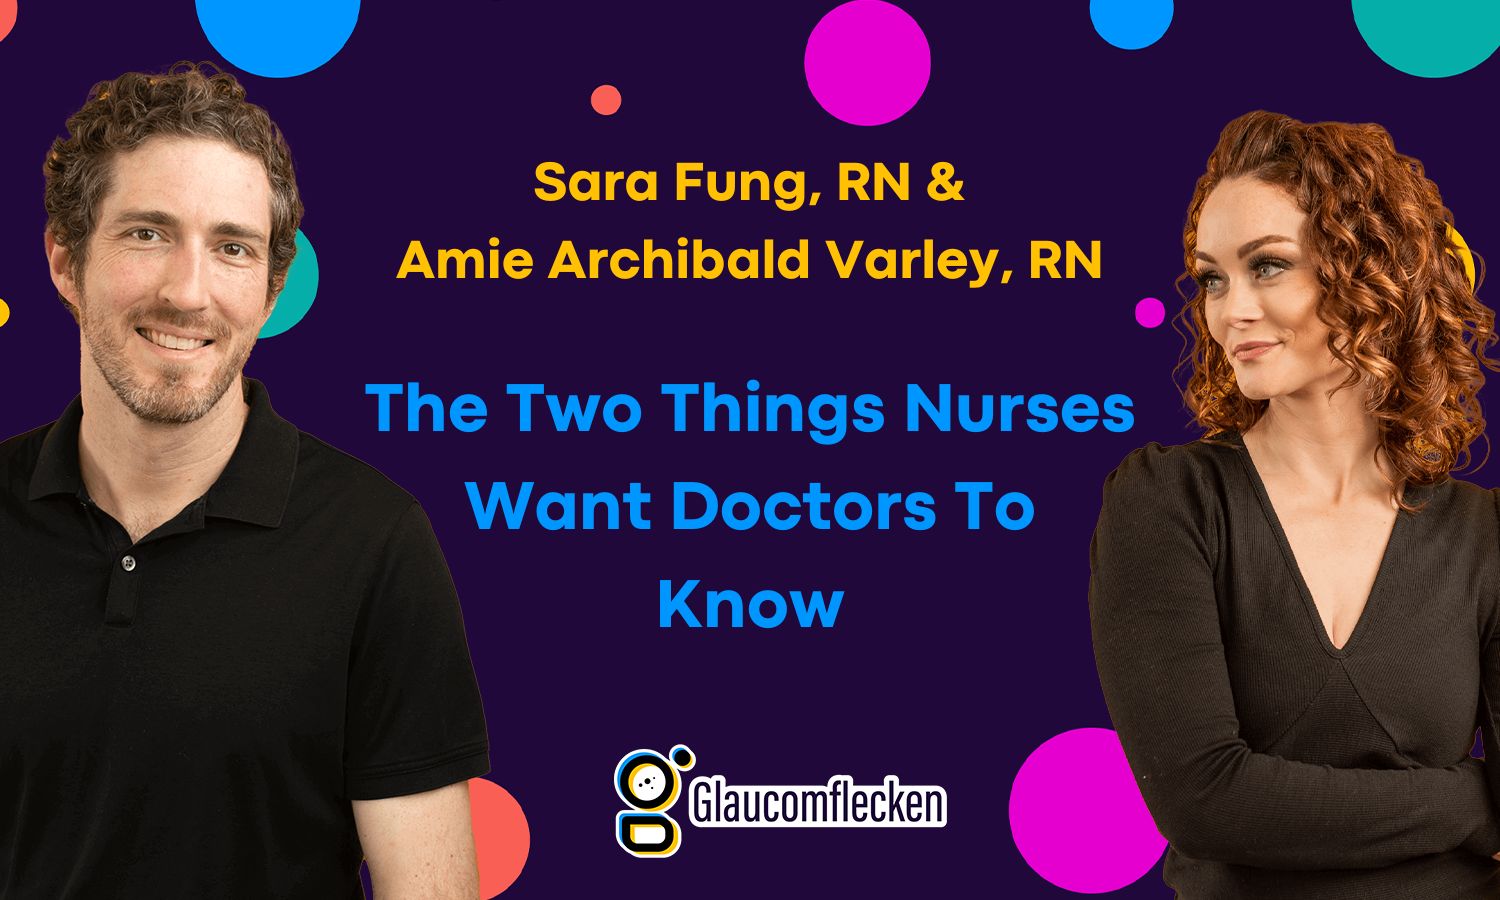 The Two Things Nurses Want Doctors To Know